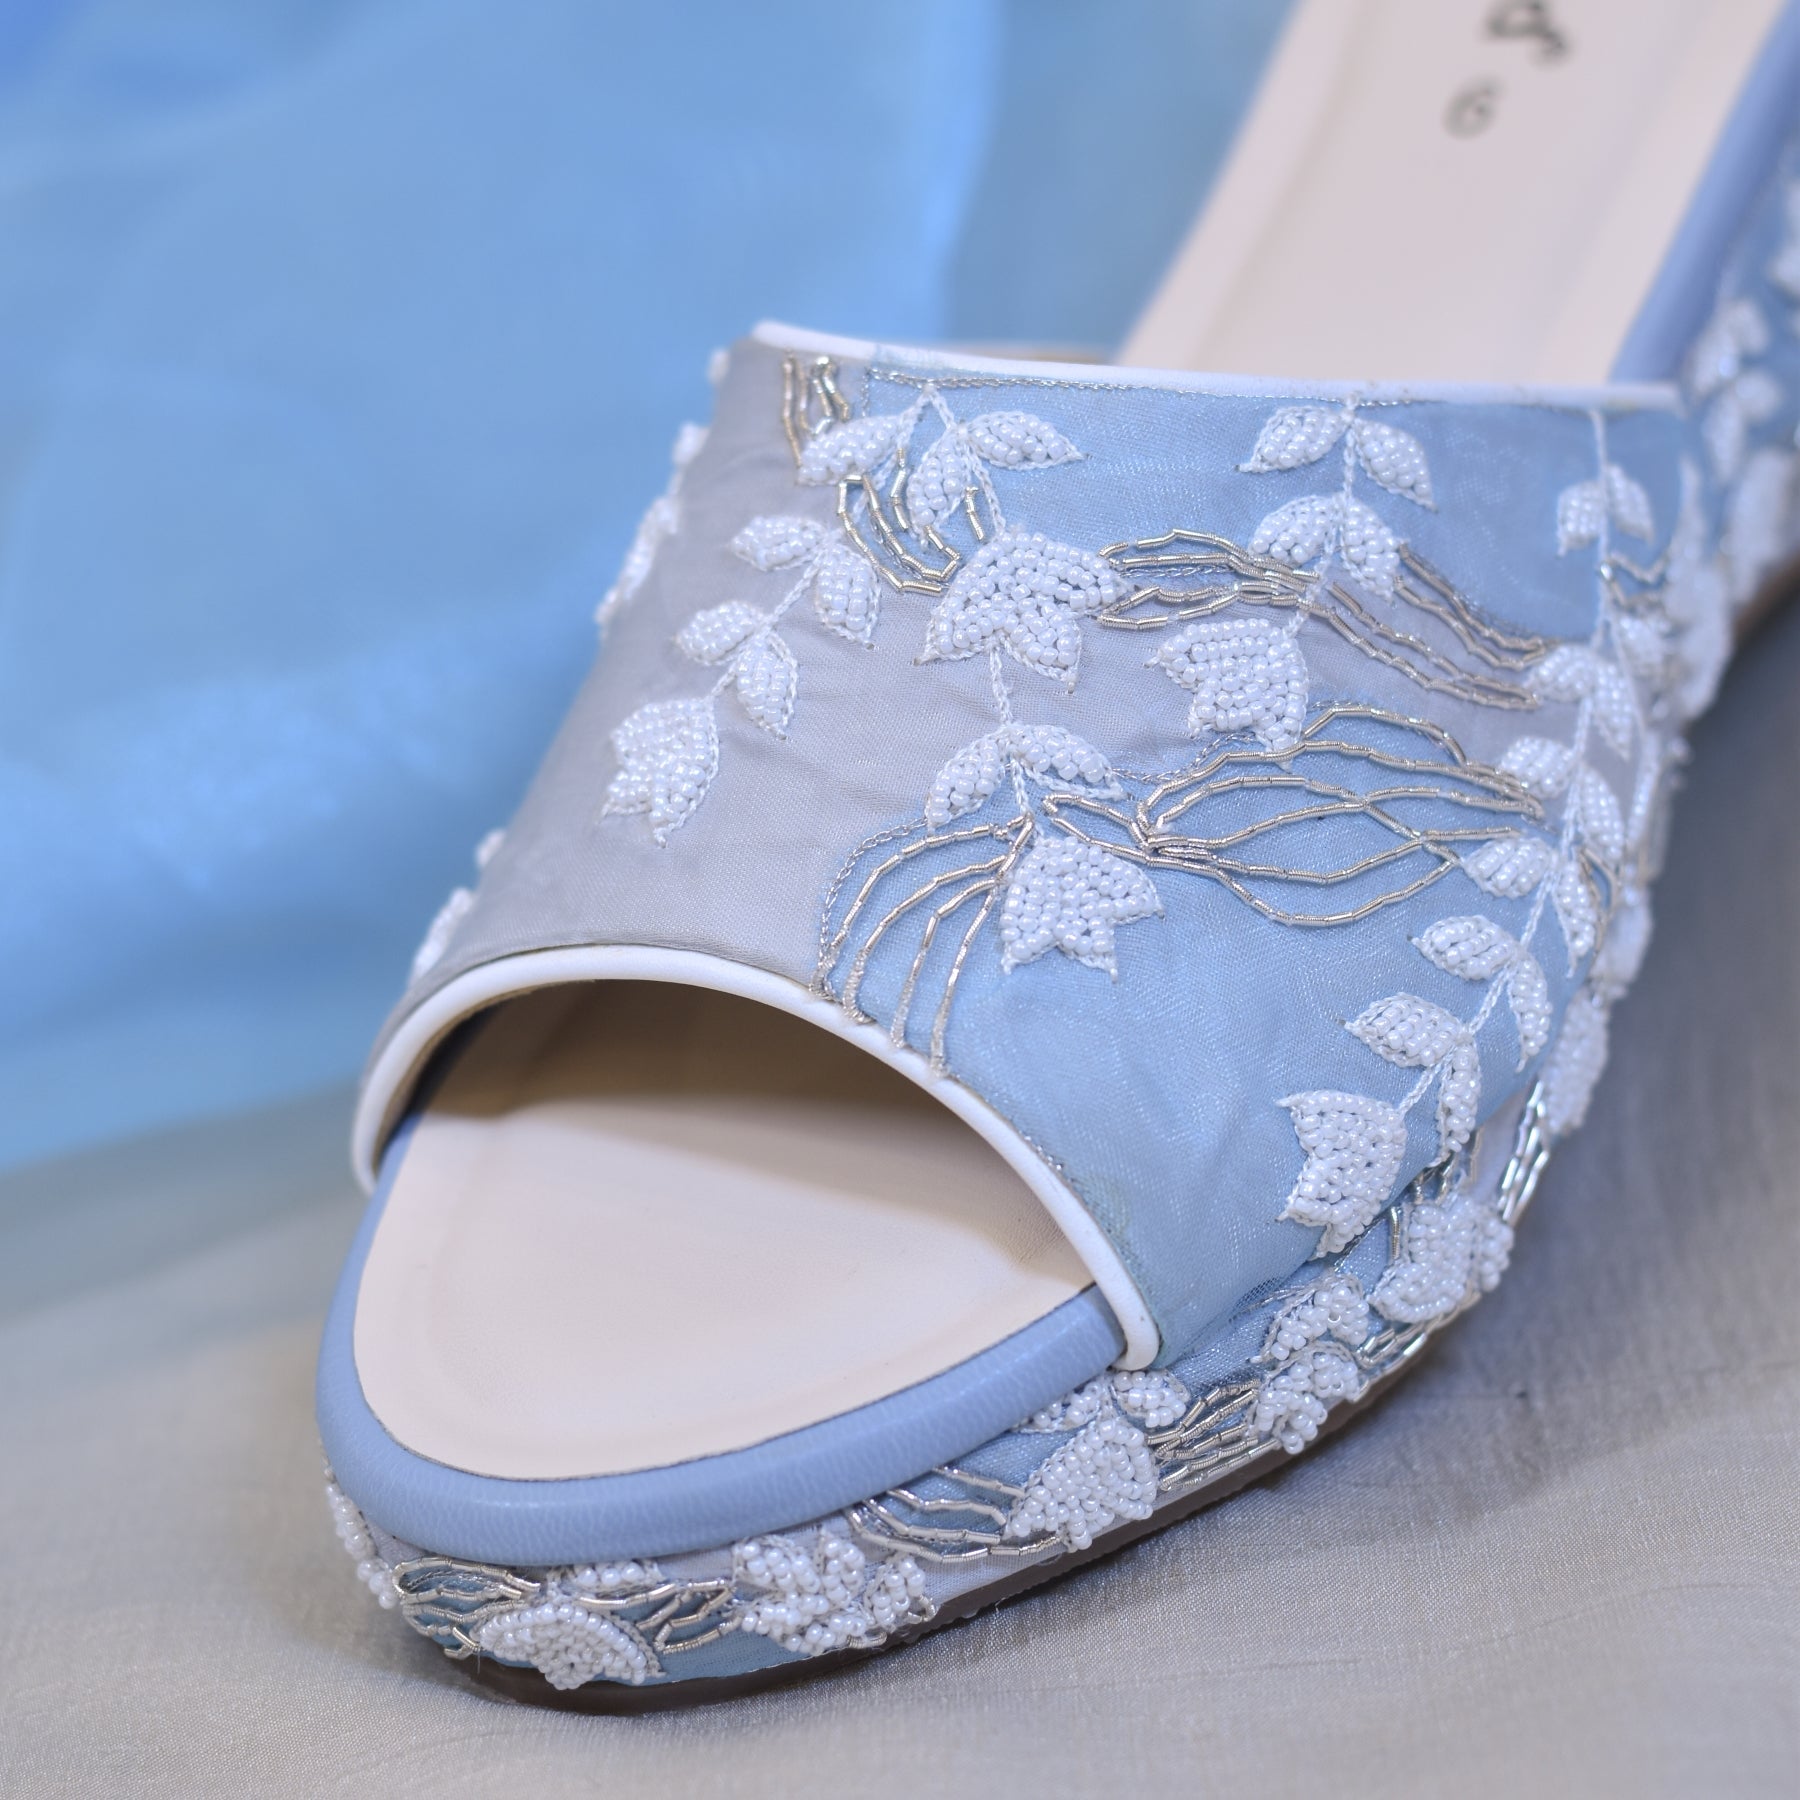 White wedges for wearing under wedding gowns 